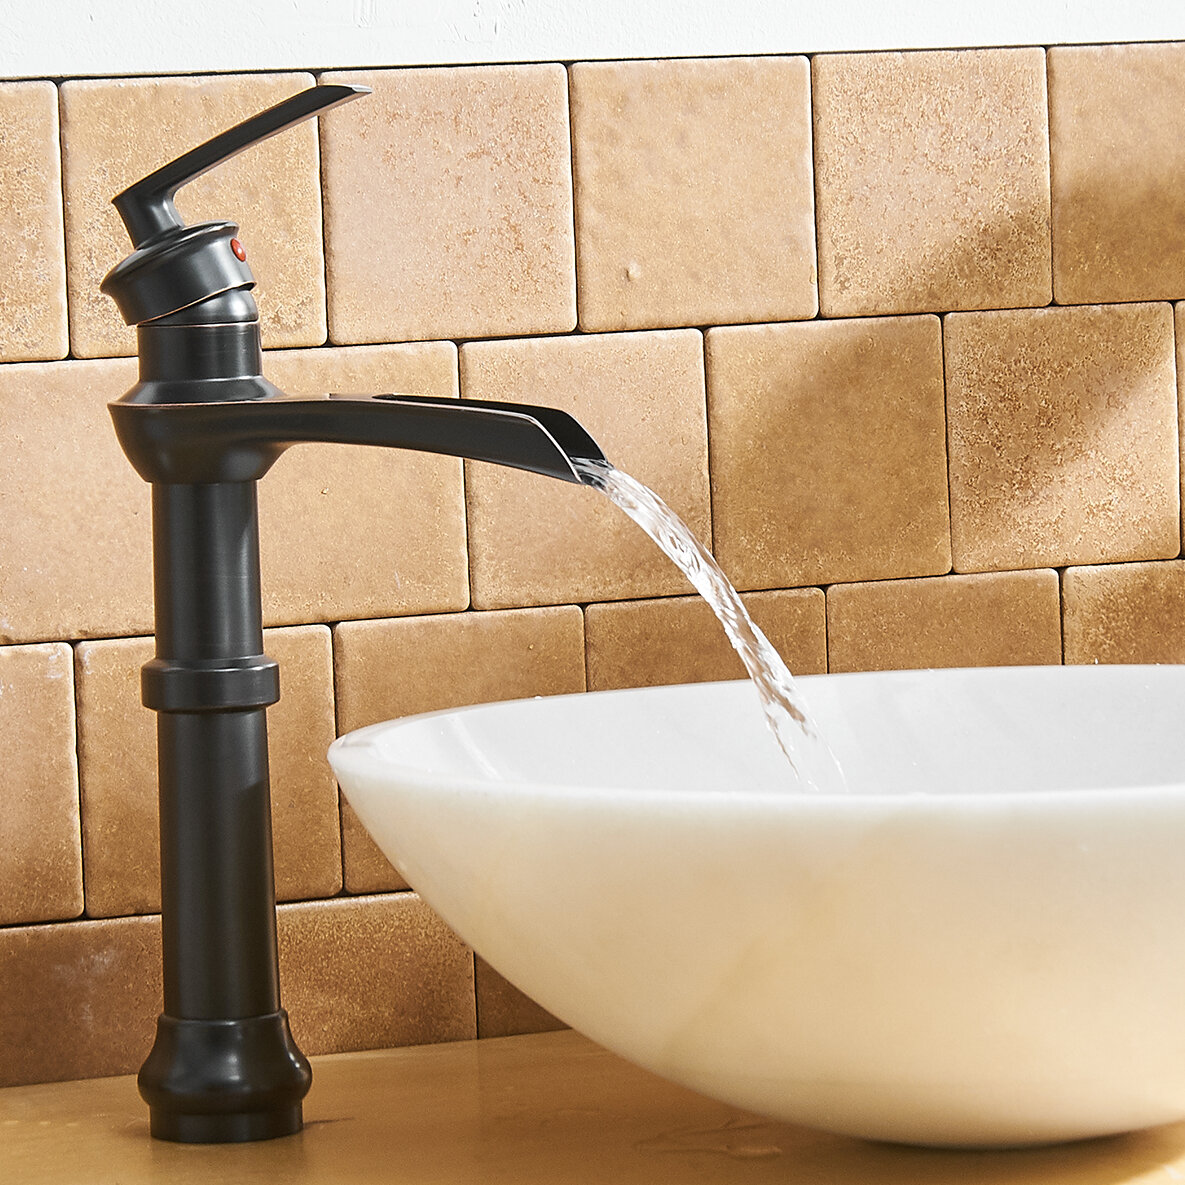 Oil Rubbed Bronze Waterfall Spout Bathroom Vessel Sink Faucet Mixer Tap 1 Hole 